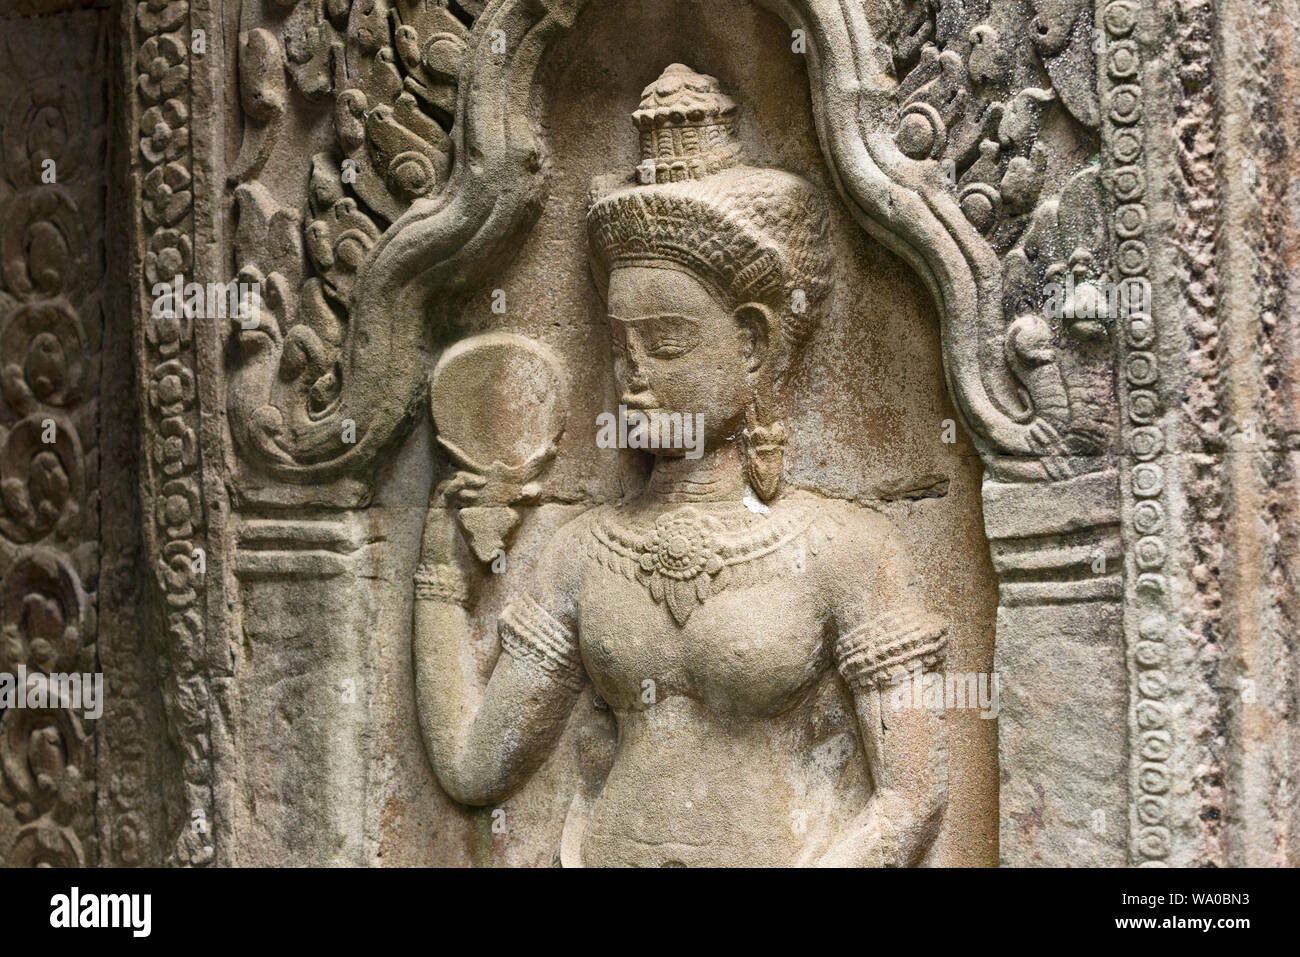 Devata are feminine deities or celestial nymphs with an enigmatic smile in Preah Khan temple, Khmer ruins in Angkor Thom in Siem Reap Cambodia Stock Photo